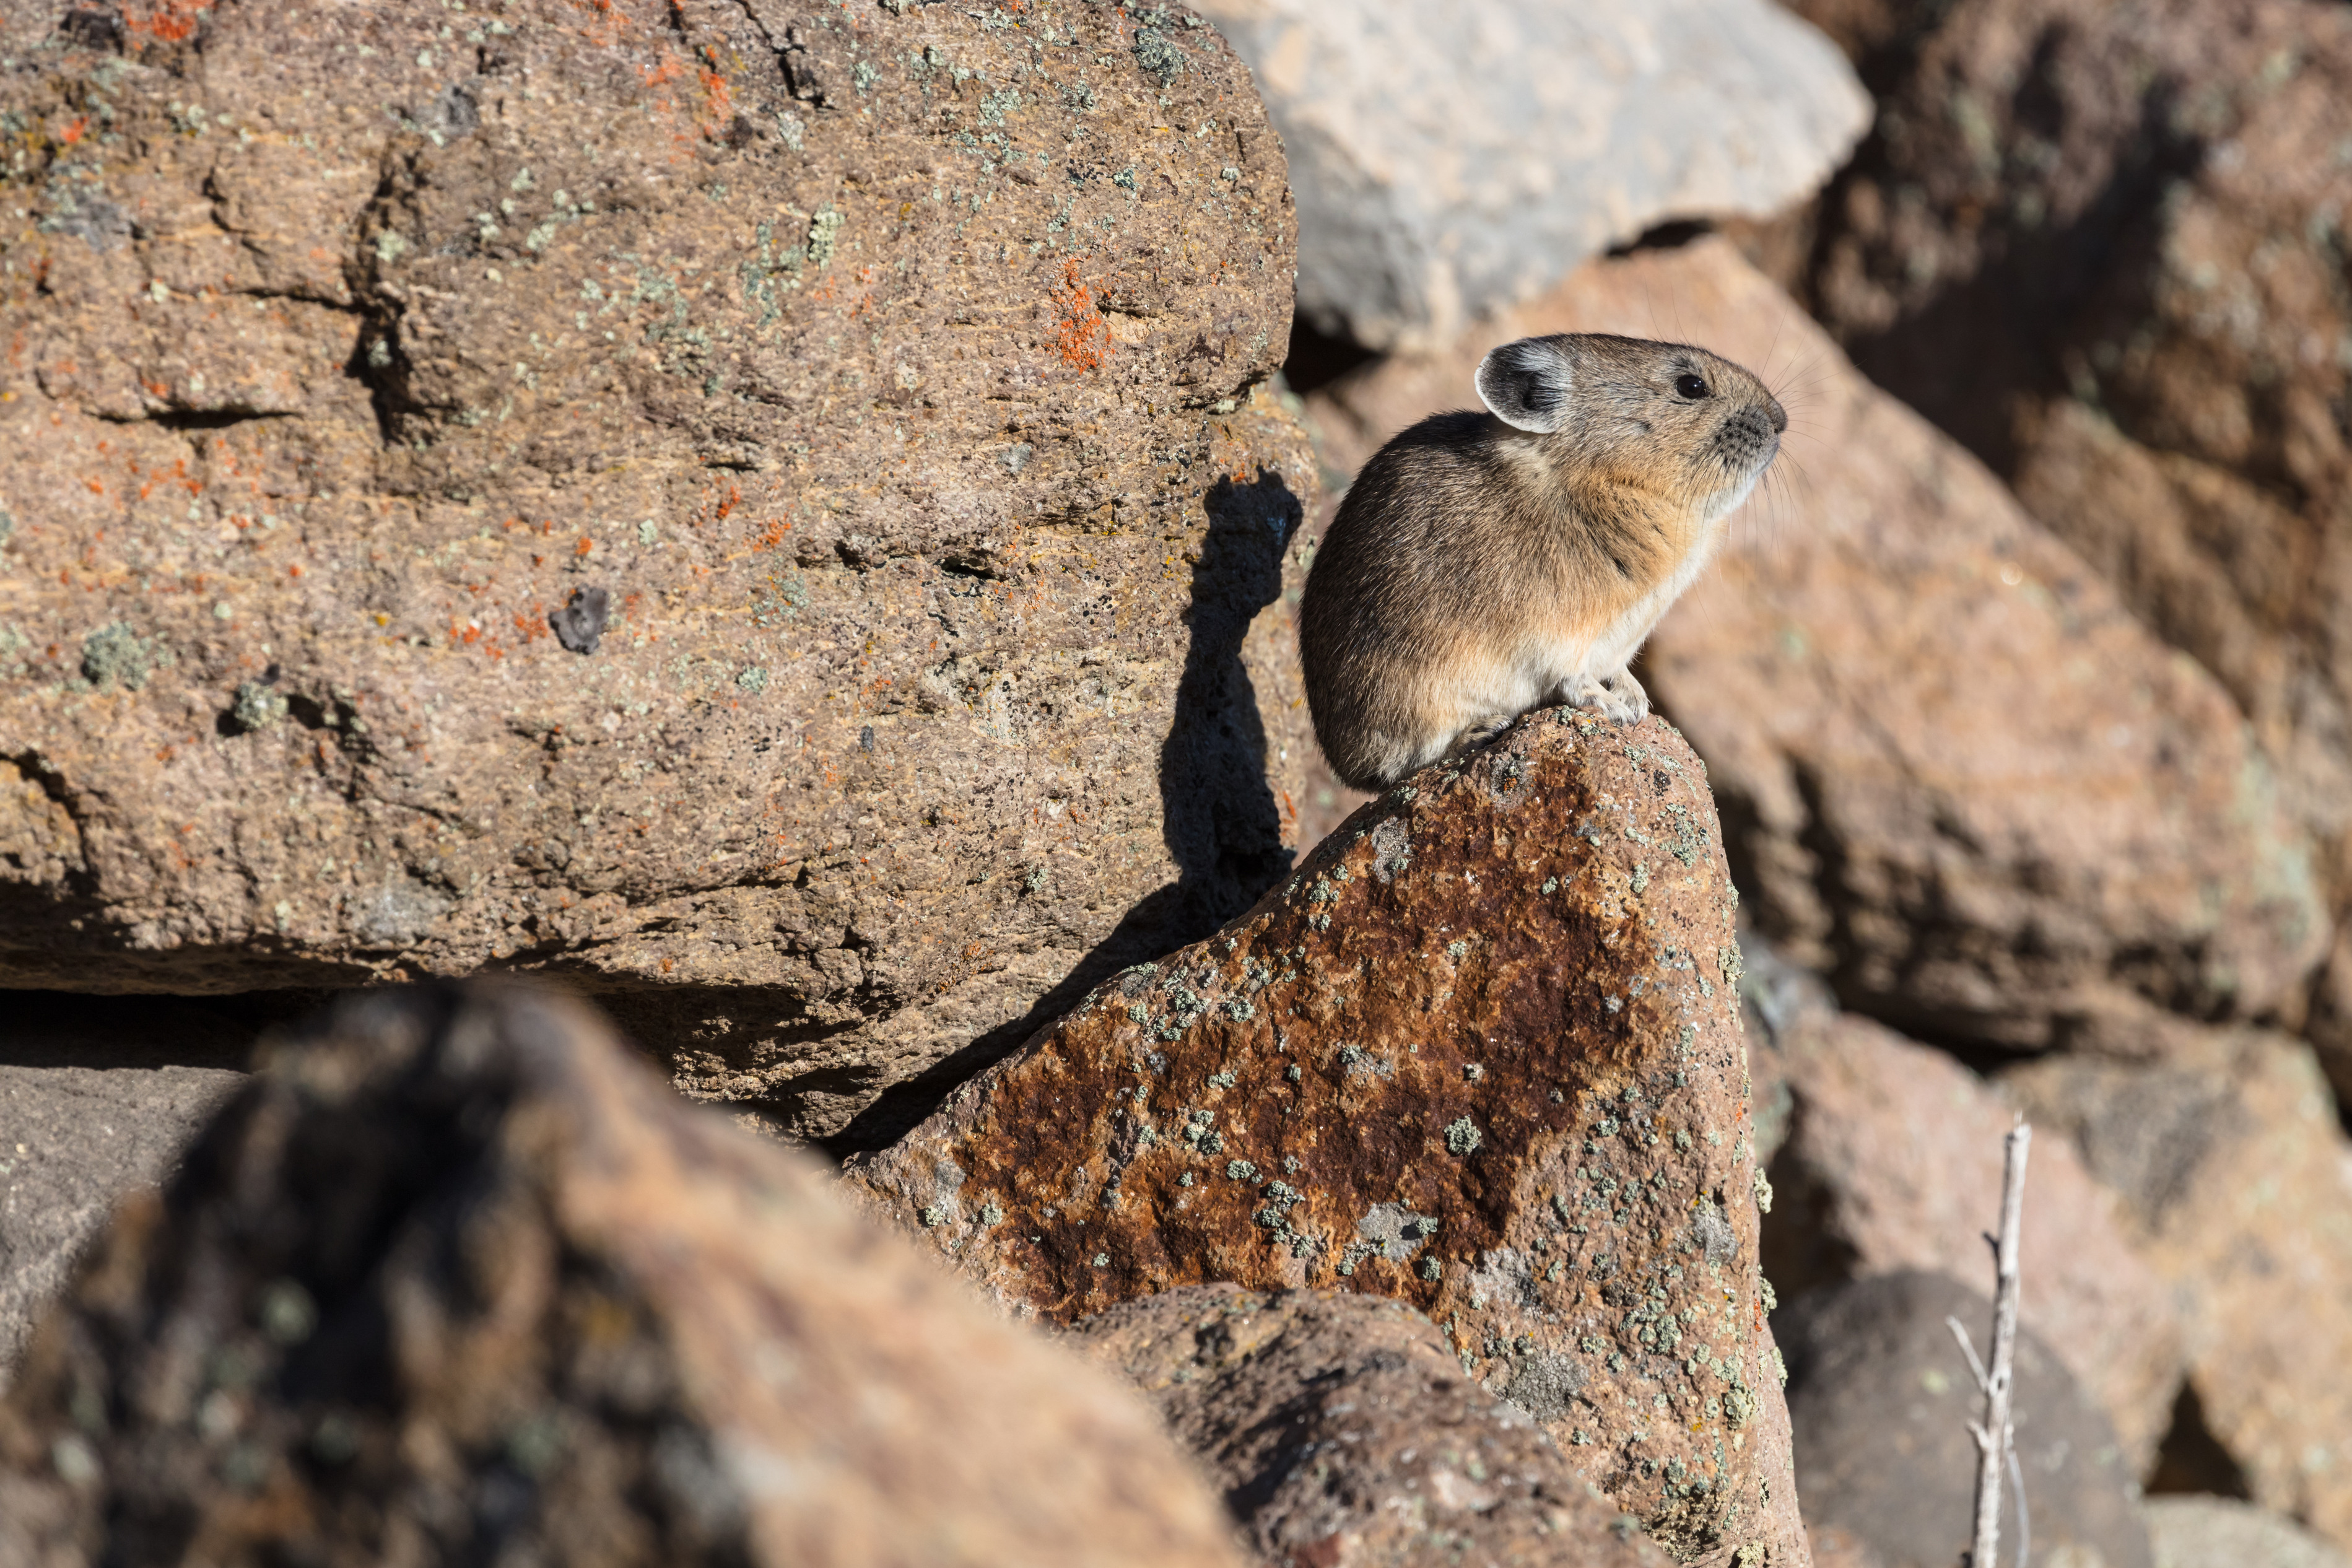 Pika sits on a rock in a boulder field.